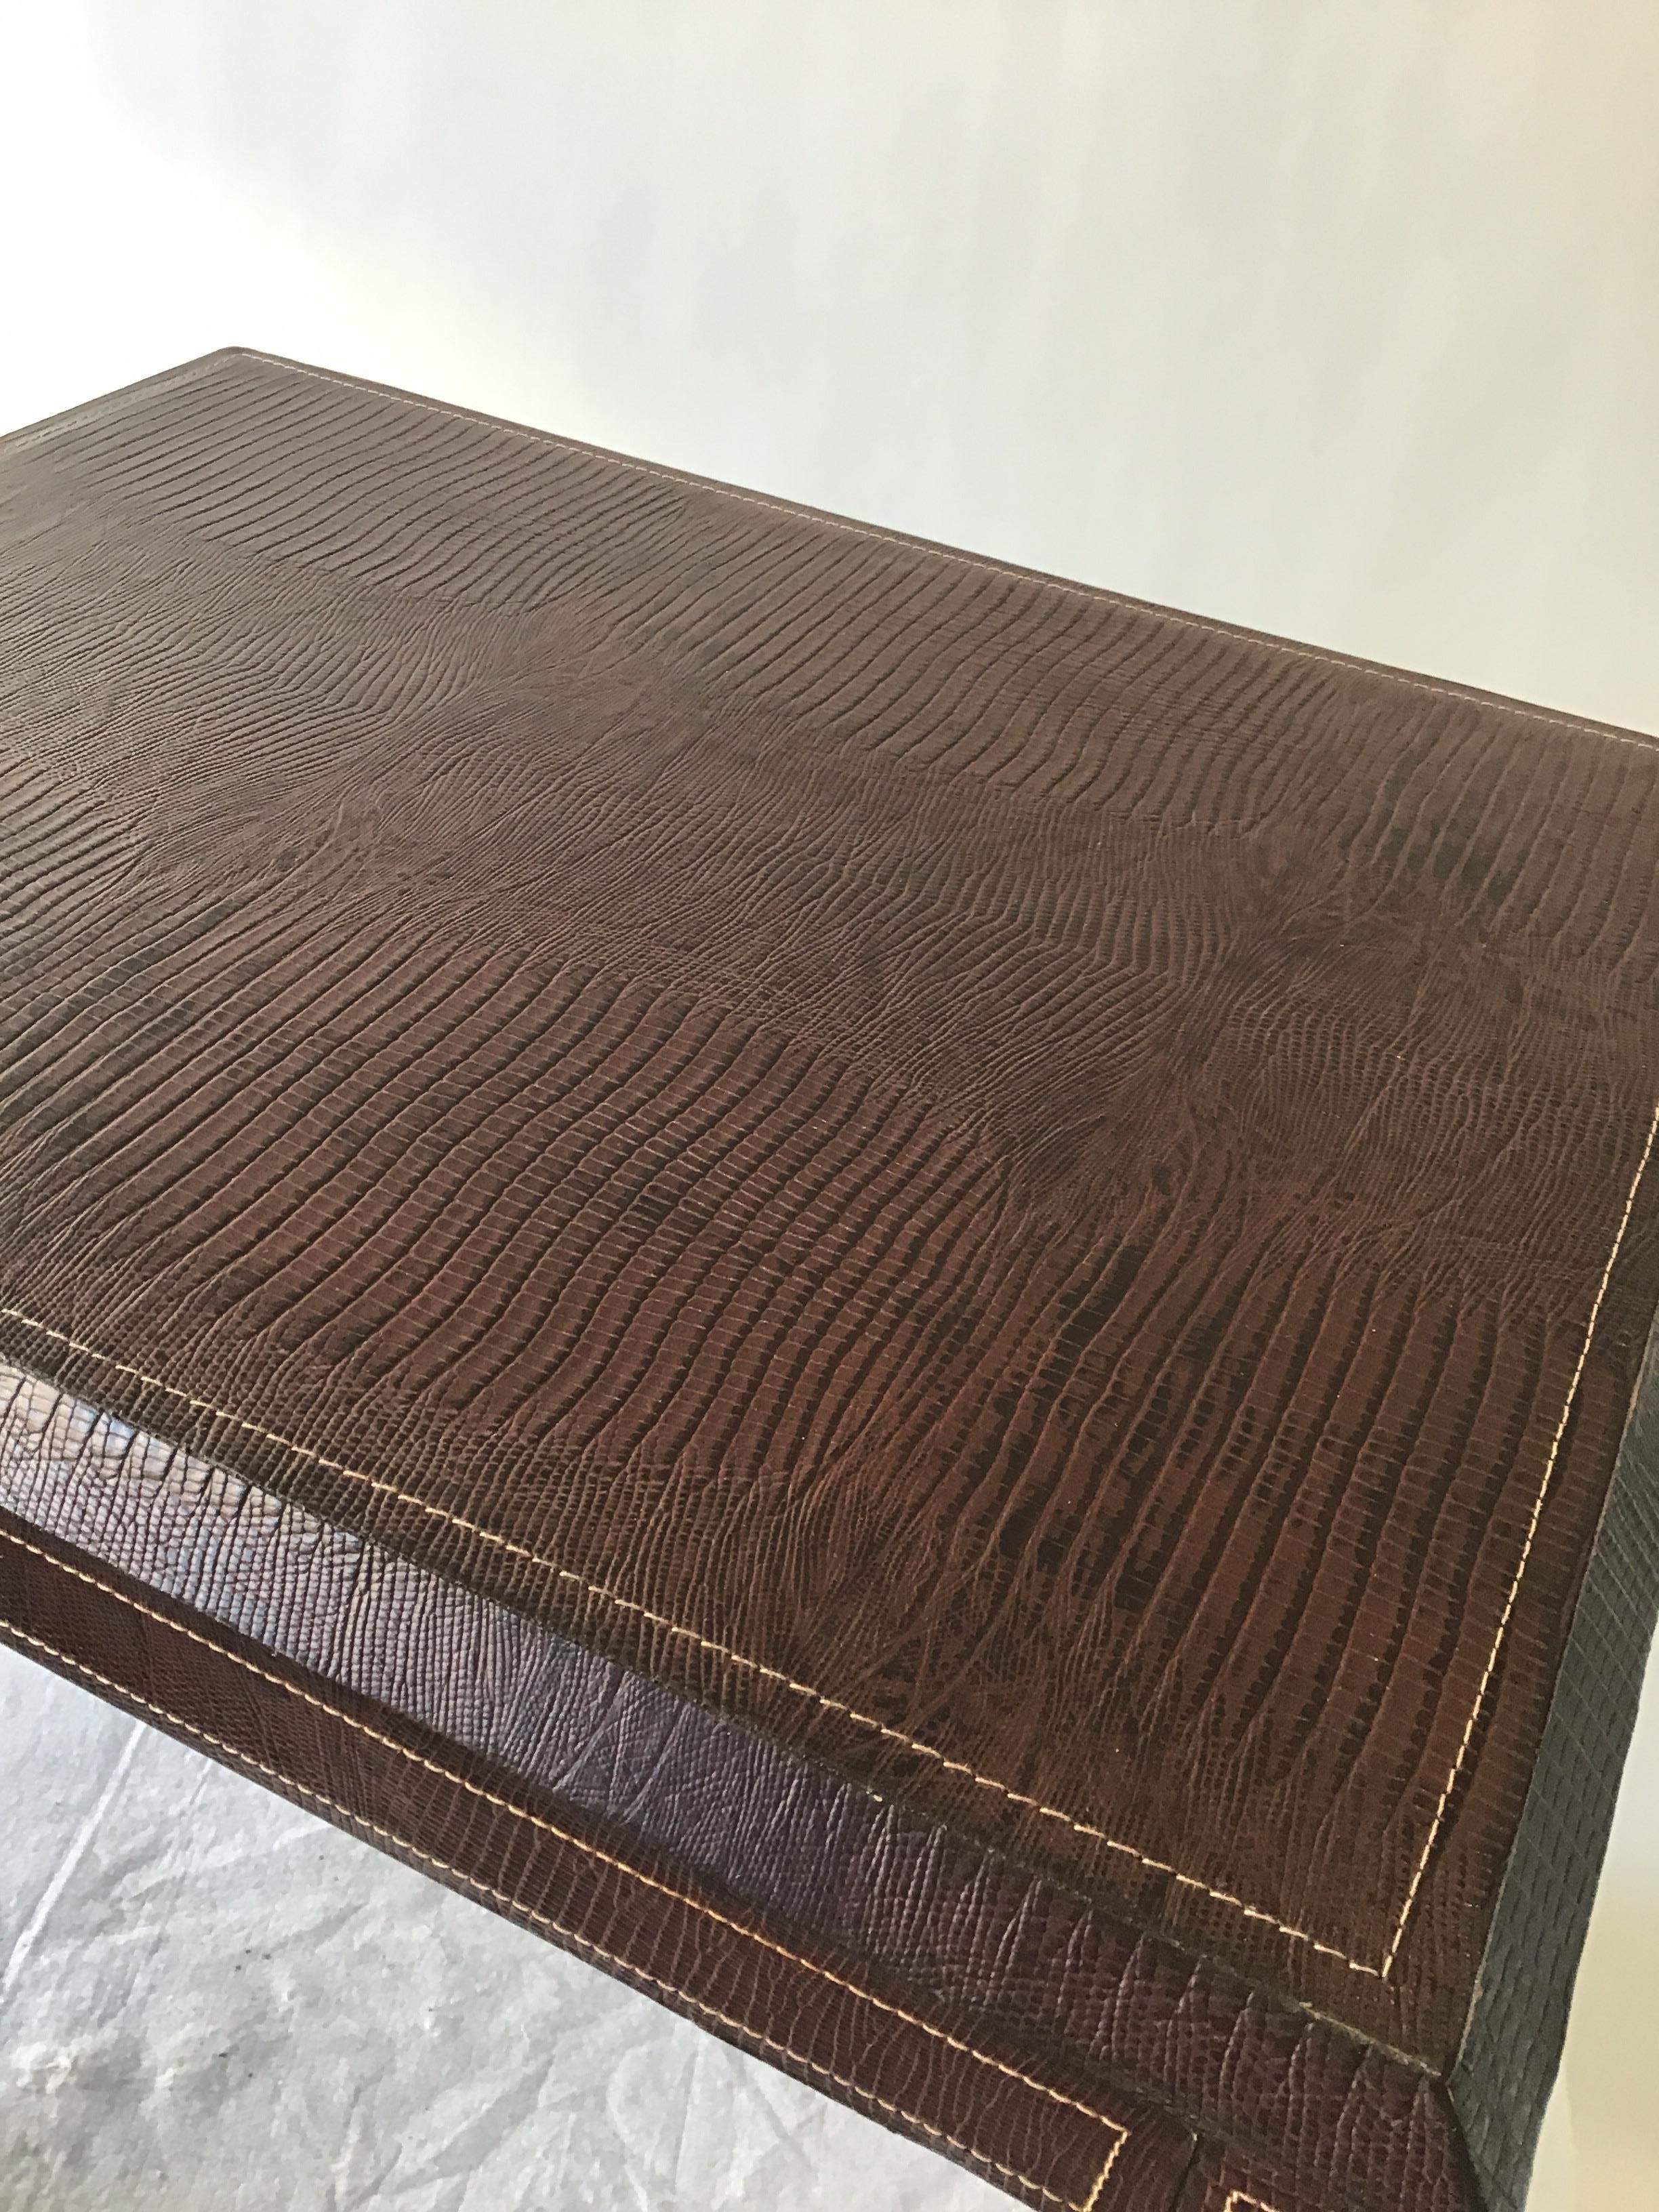 Lizard embossed leather side table with top stitching.